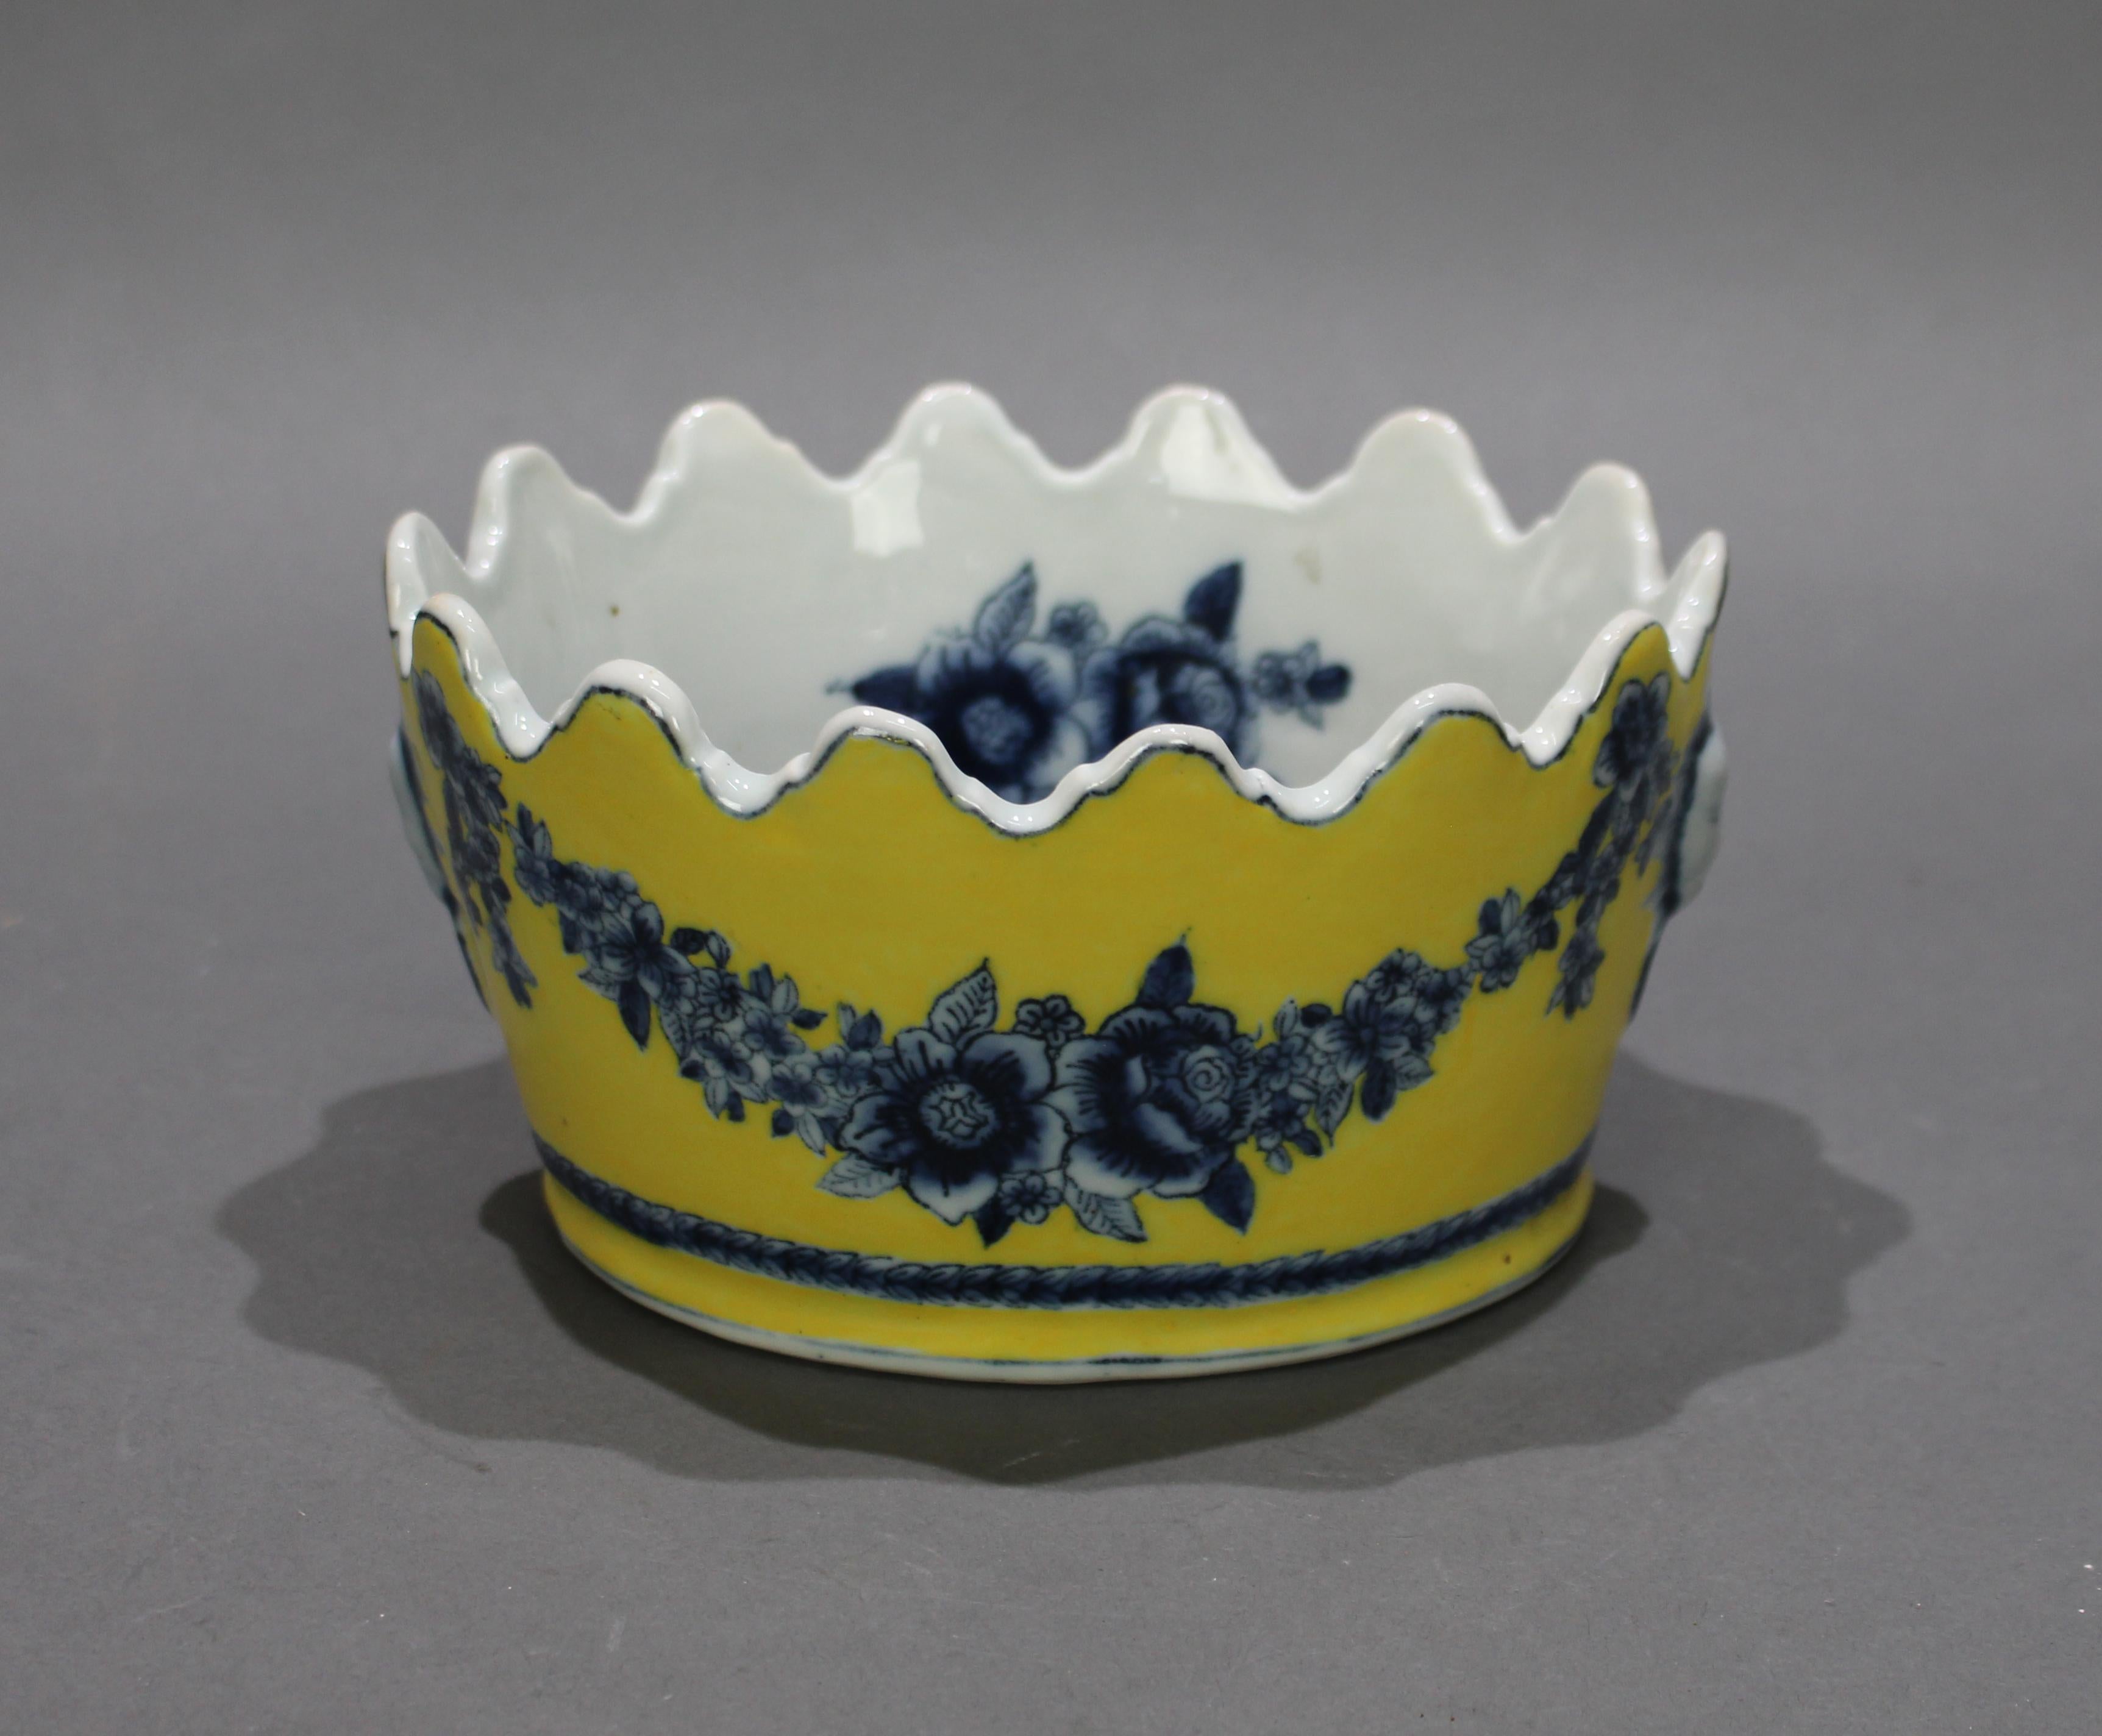 United Wilson Porcelain bowl


20th century. 

Measures 17 x 14 x 9 (height) cm. 

Offered in very good condition; free from chips, cracks or repairs

Imperial Chinese yellow.